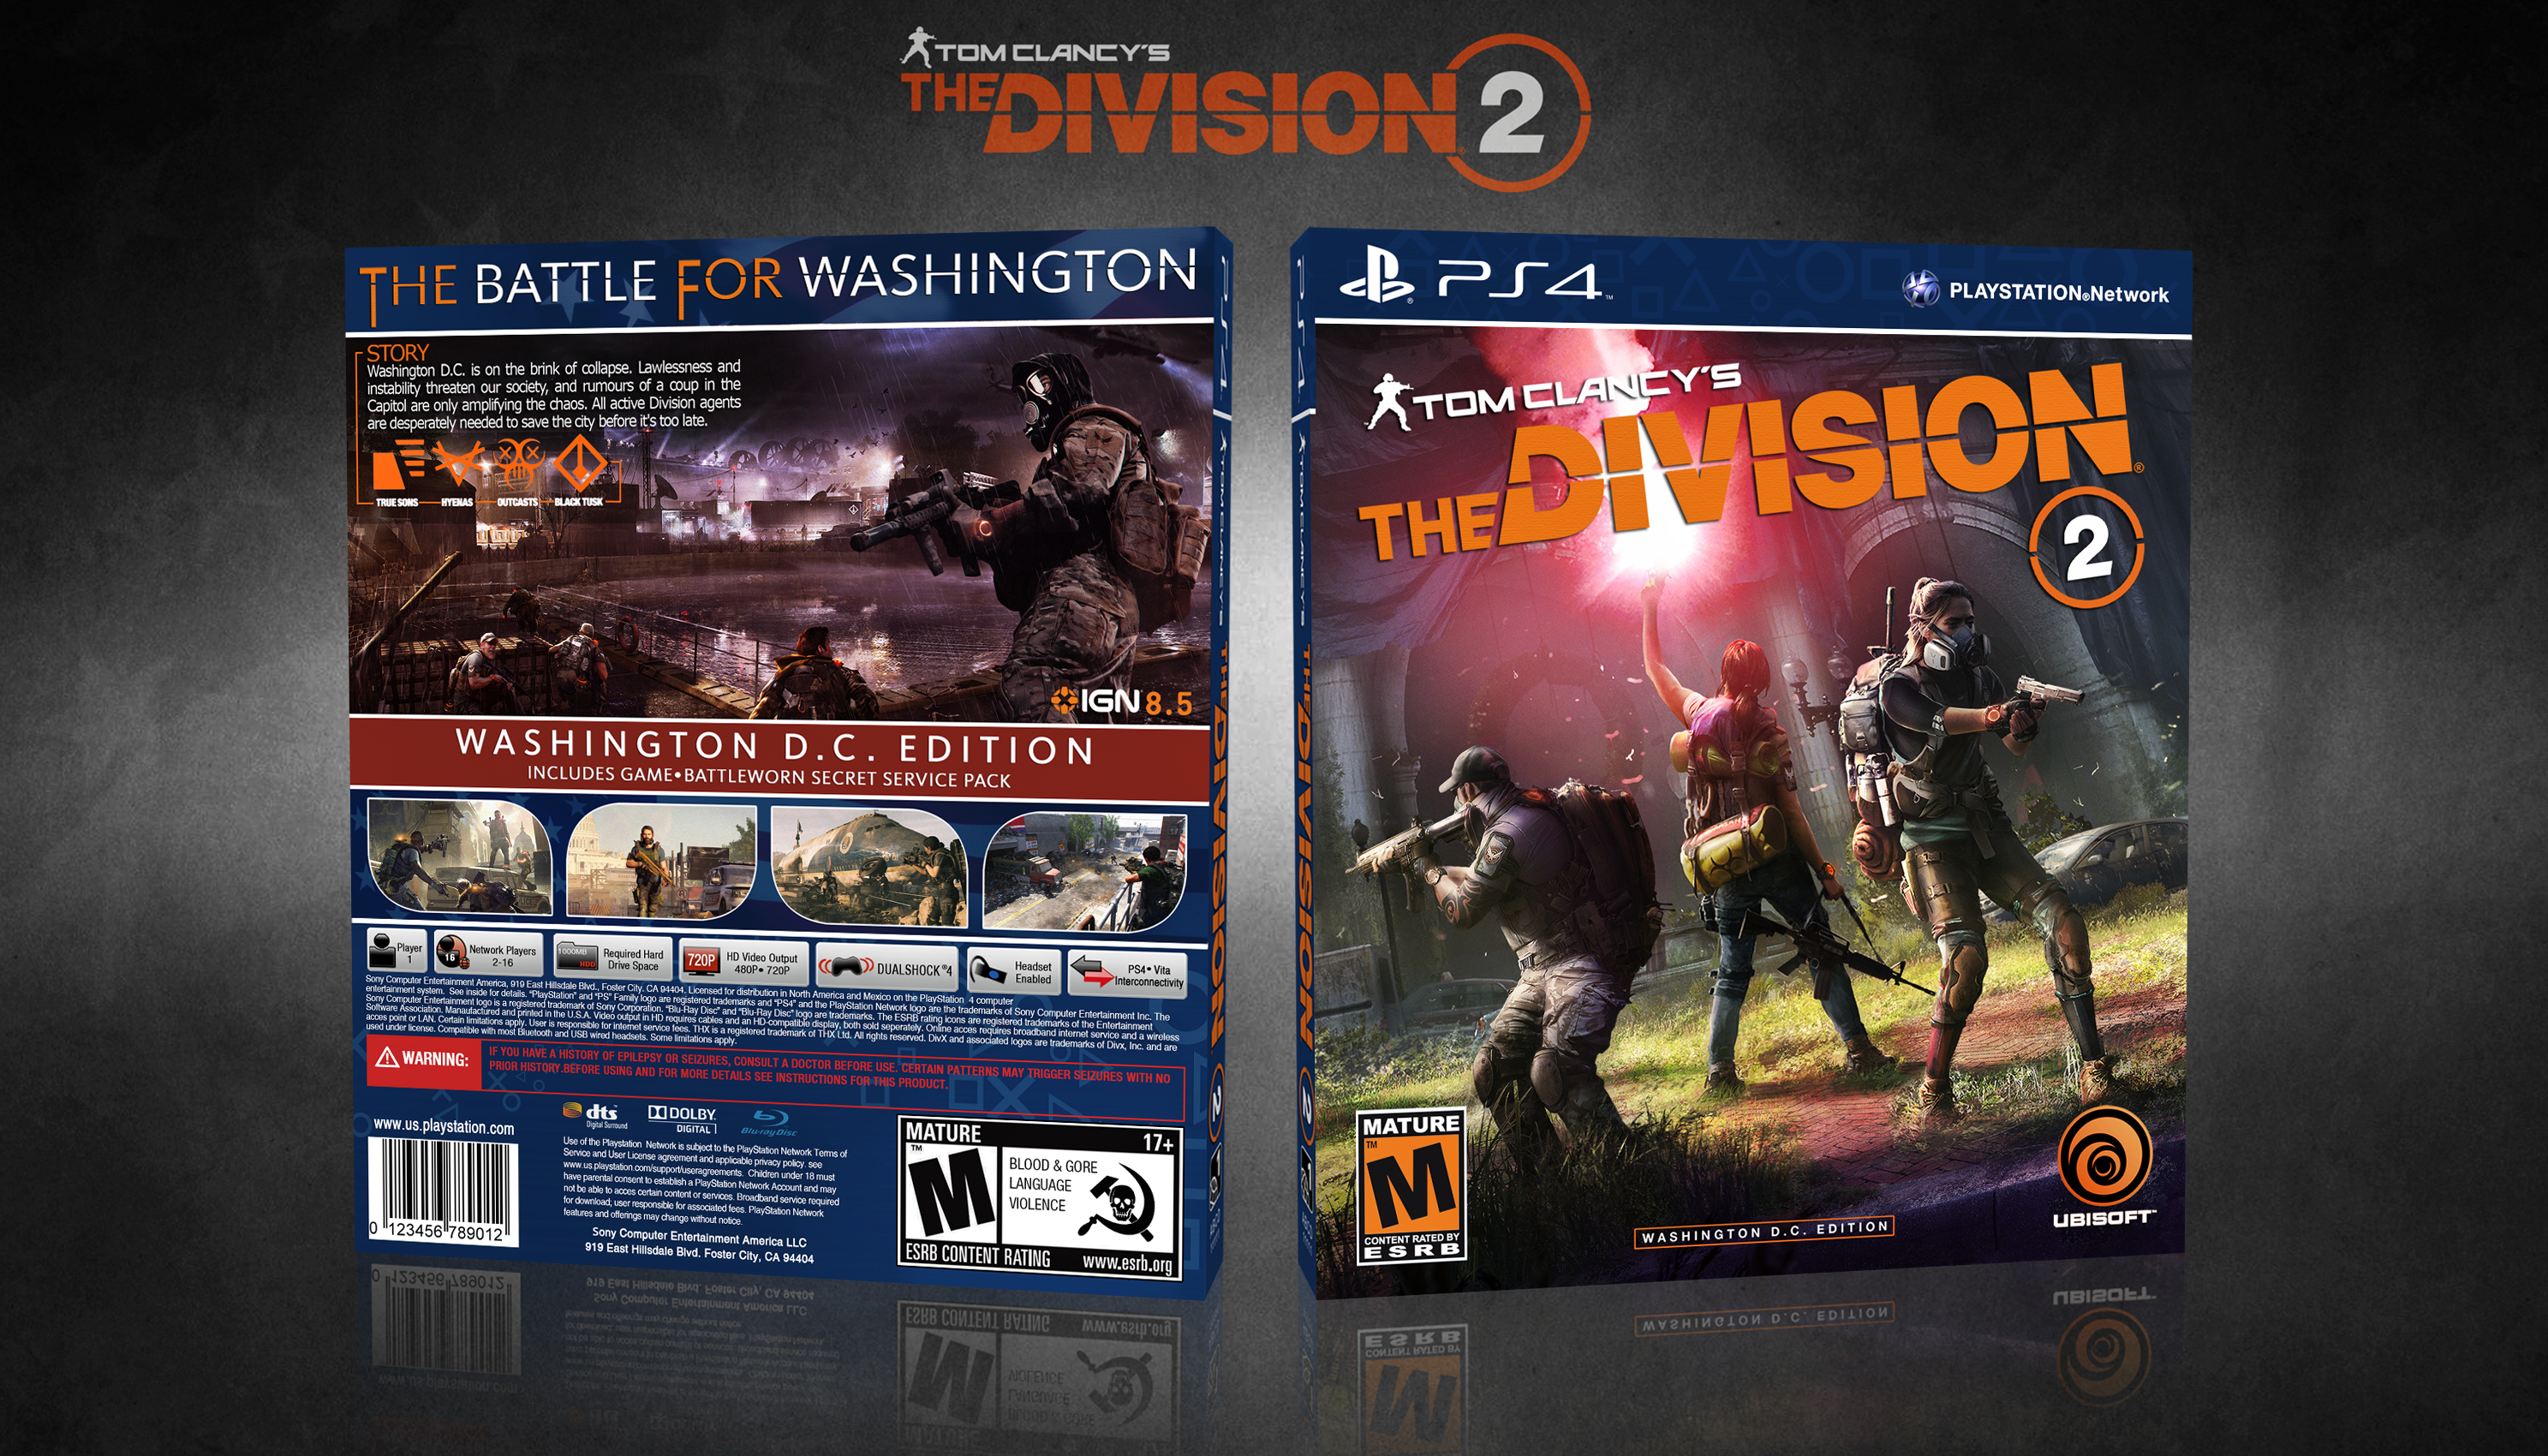 Division 2 ps4. Дивизион 2 на пс4. Tom Clancy's the Division 2 ps4. Том Клэнси дивизион 2 на ПС 4.